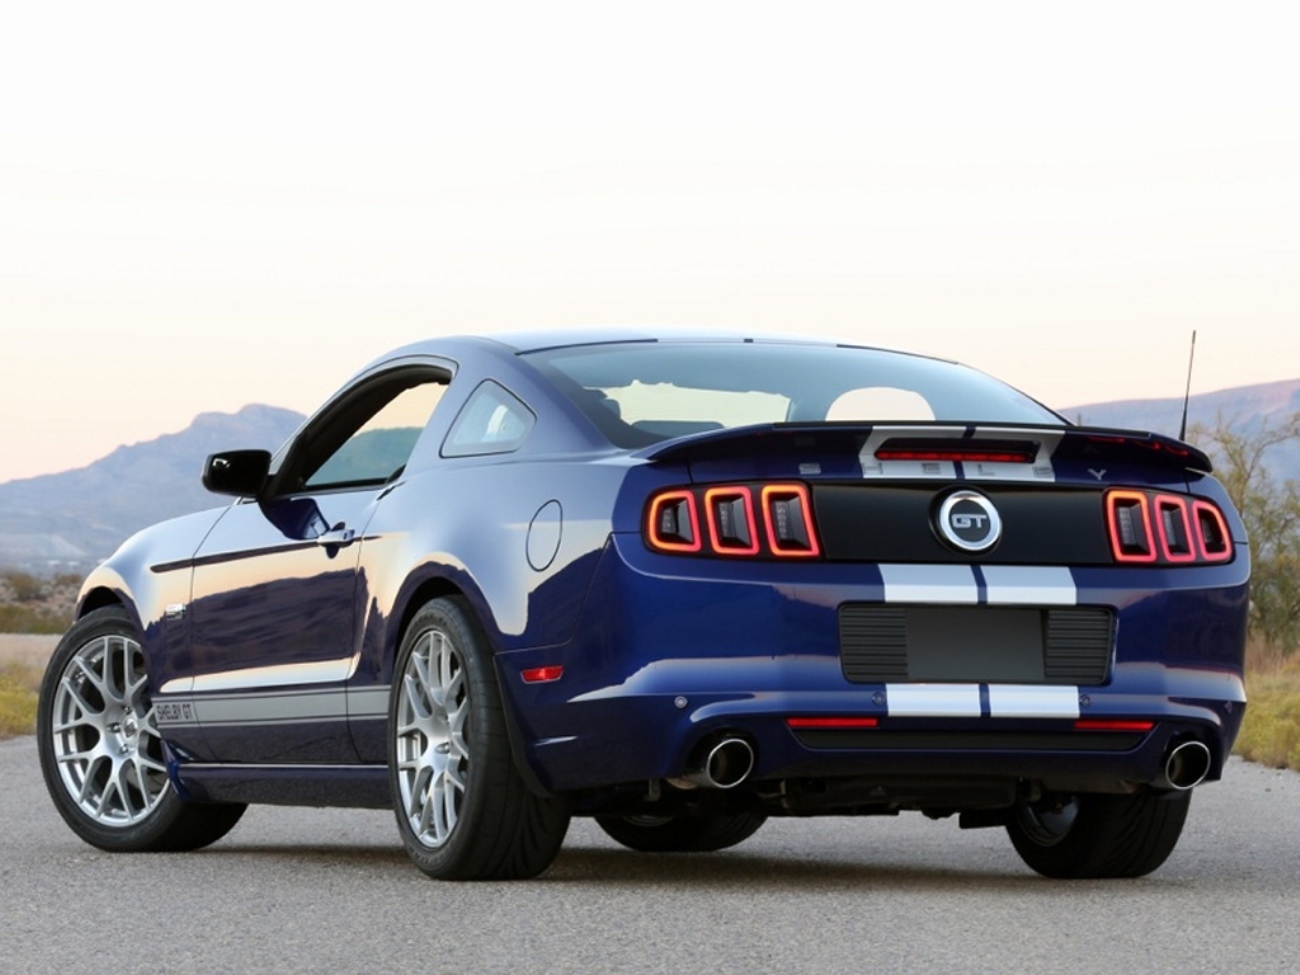 Wallpaper Ford Mustang Shelby Gt Car Photos